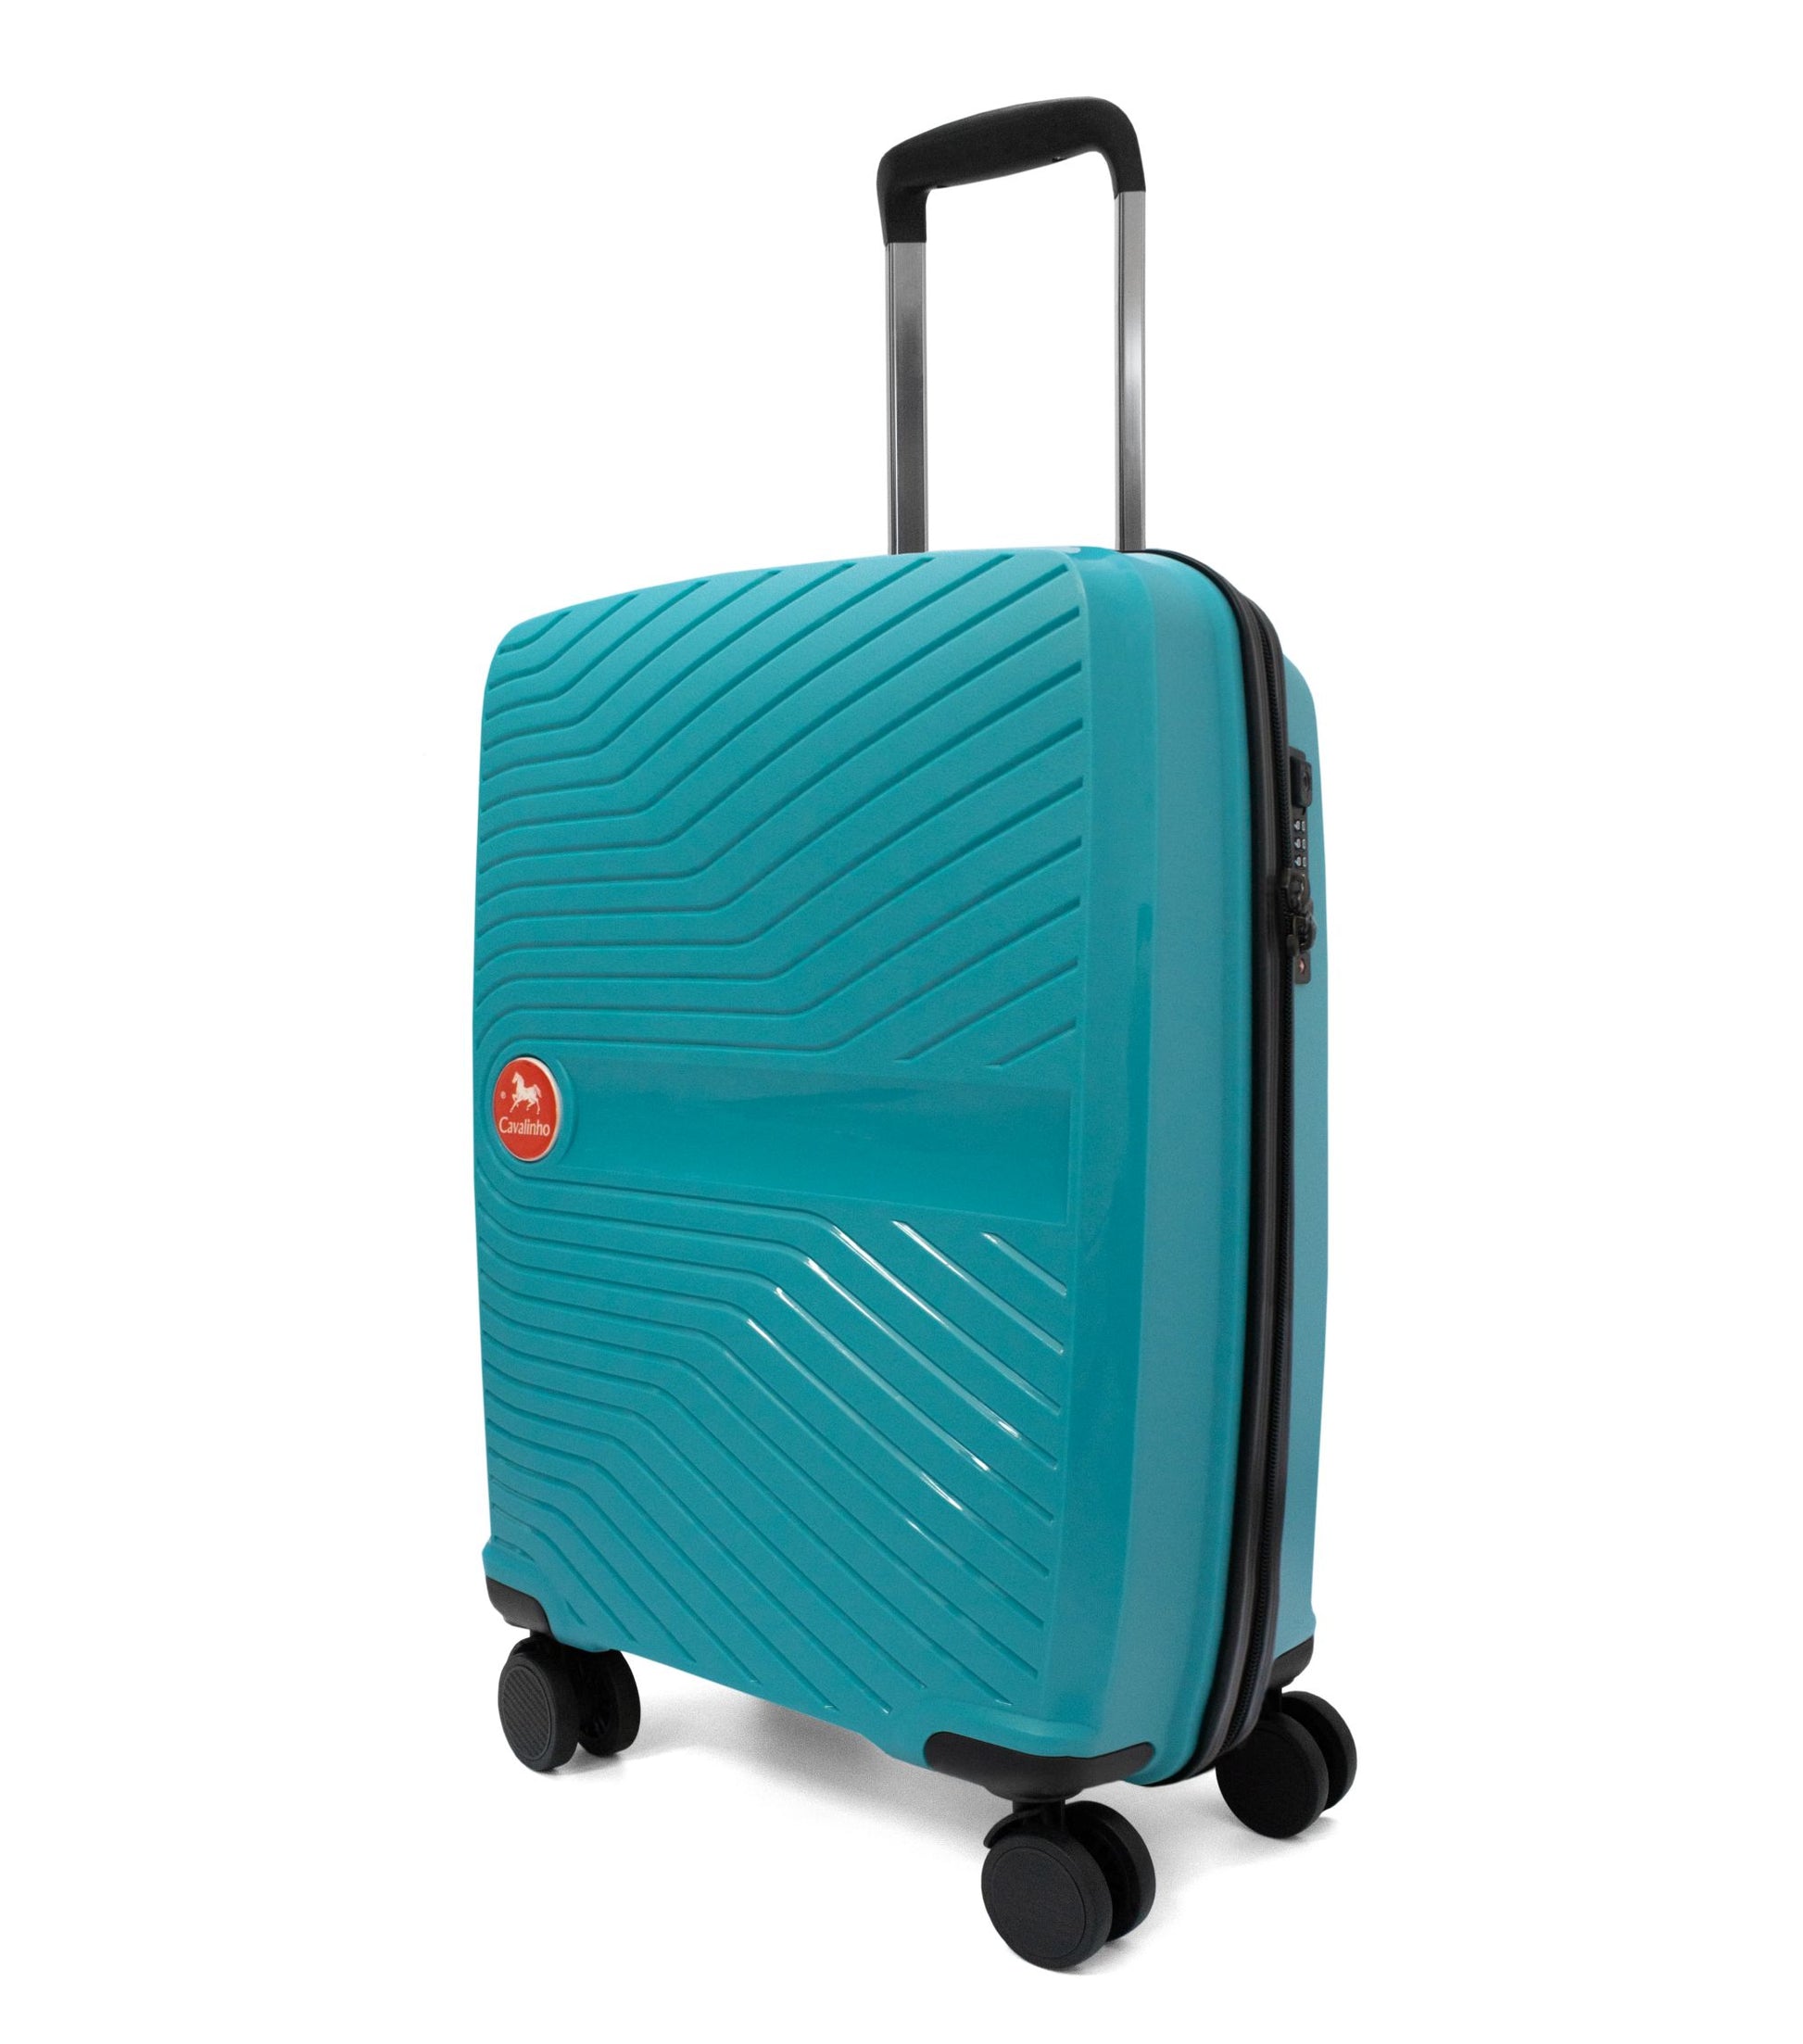 #color_ 19 inch DarkTurquoise | Cavalinho Colorful Carry-on Hardside Luggage (19") - 19 inch DarkTurquoise - 68020004.25.19_2